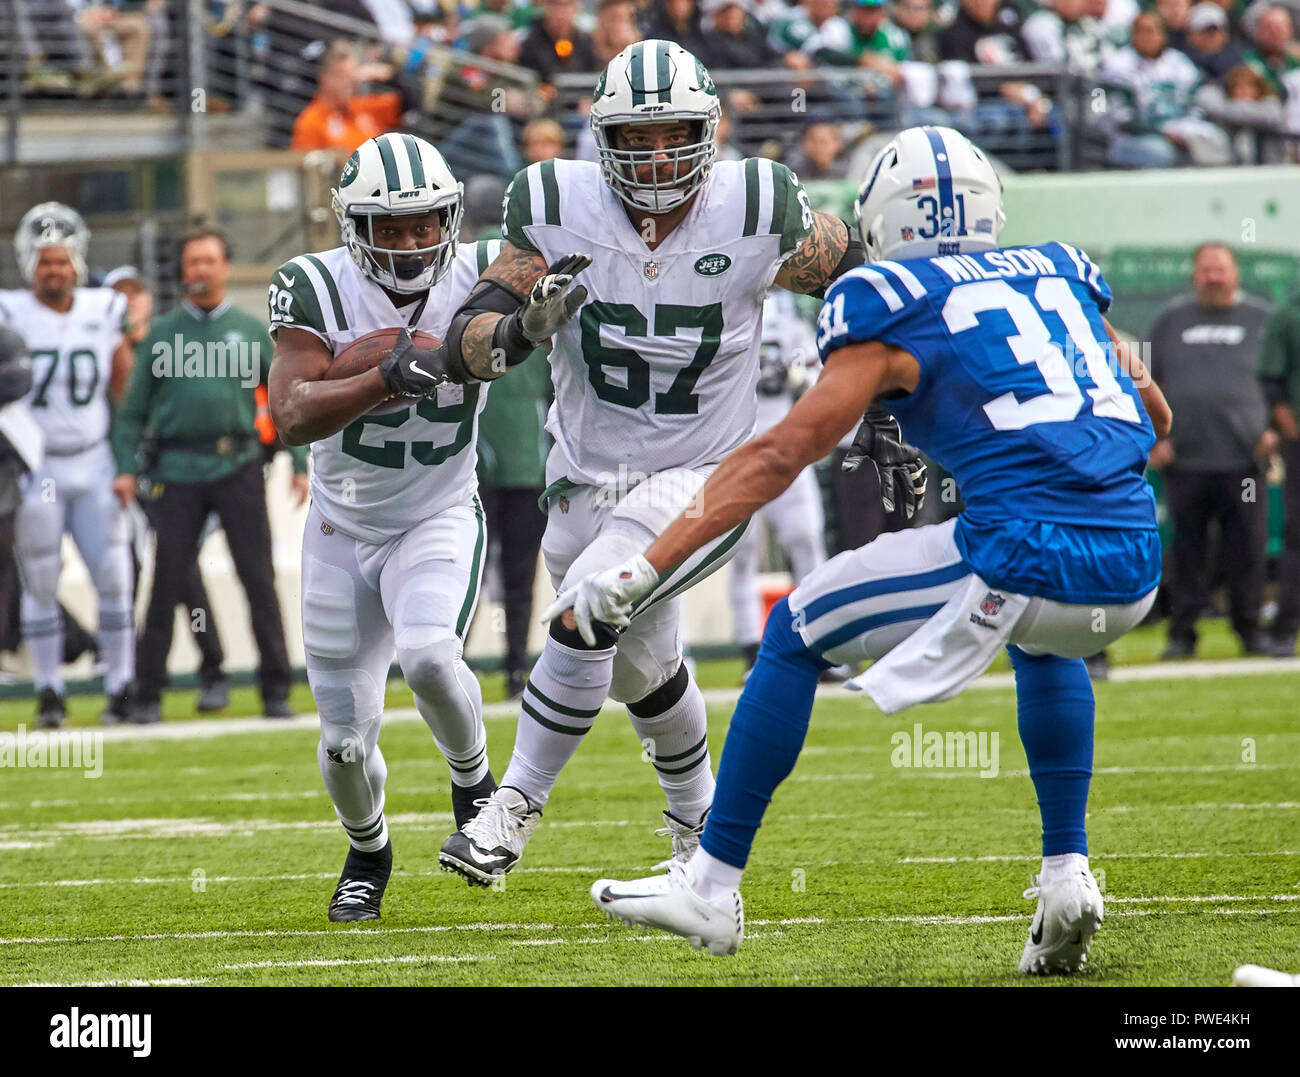 East Rutherford, New Jersey, USA. 14th Oct, 2018. New York Jets running  back Bilal Powell (29) follow s his blocker offensive guard Brian Winters  (67) against Indianapolis Colts cornerback Quincy Wilson (31)